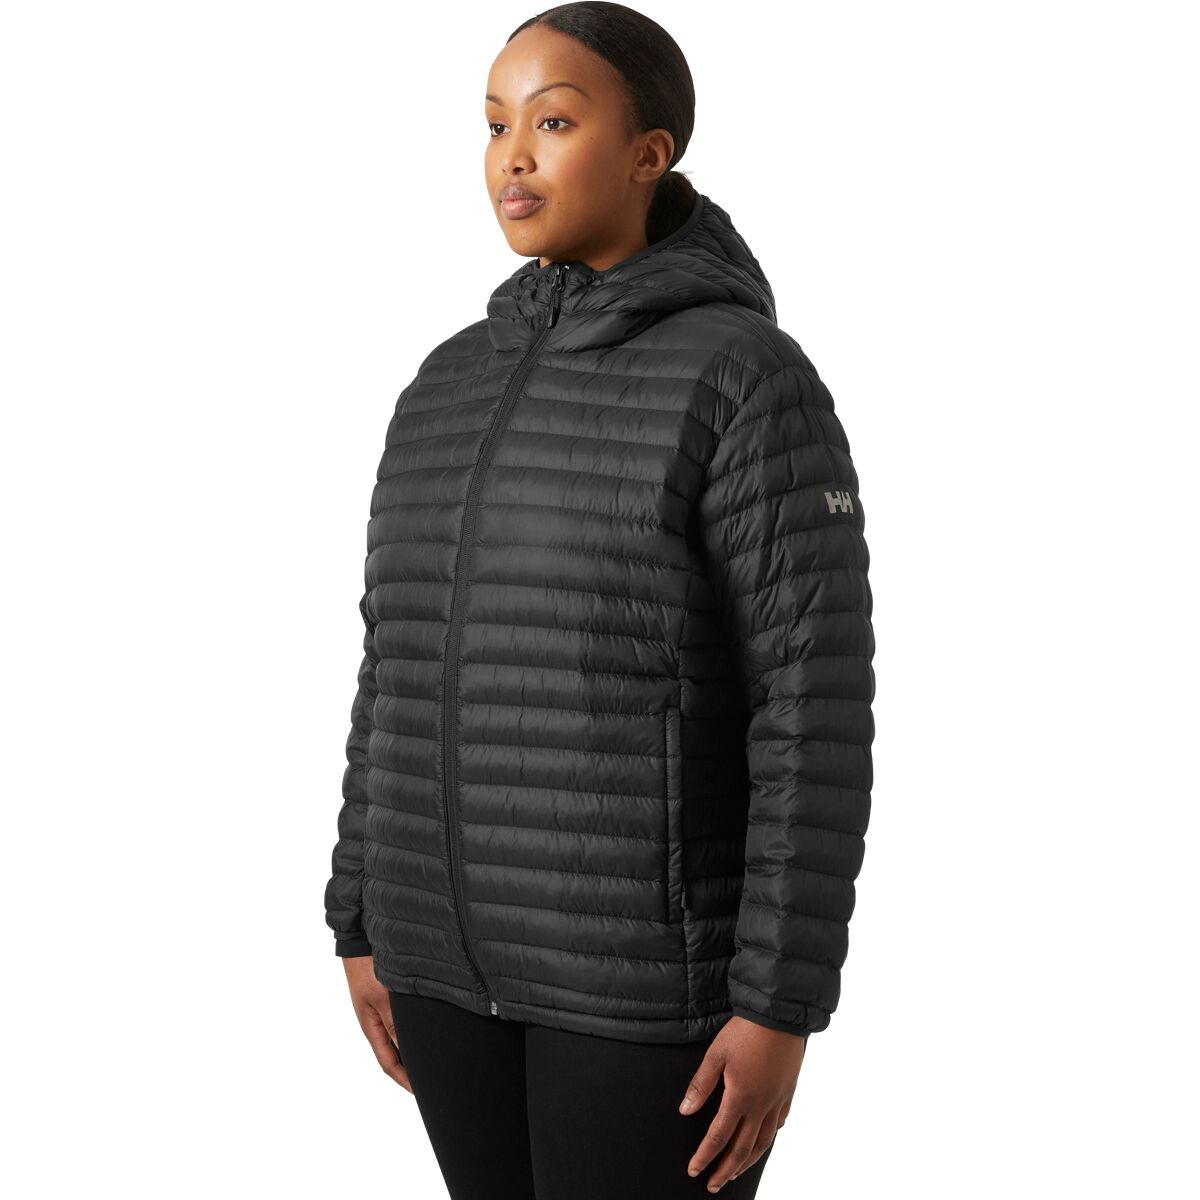 Helly Hansen Sirdal Hooded Insulated Plus Jacket - Women's